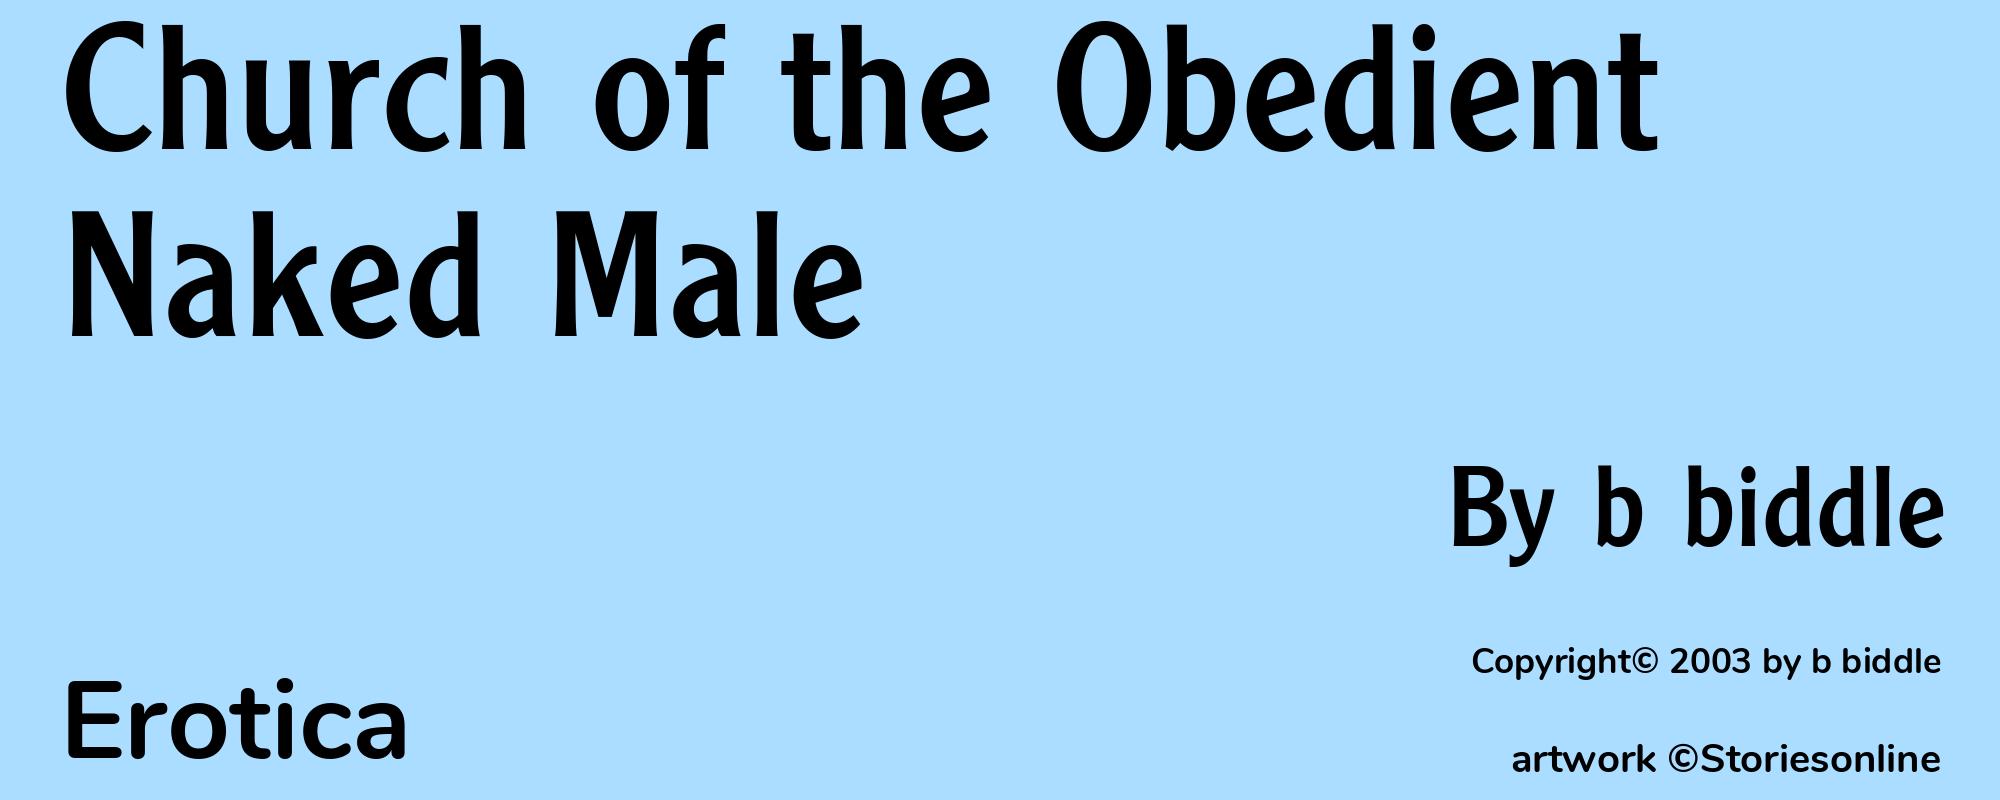 Church of the Obedient Naked Male - Cover